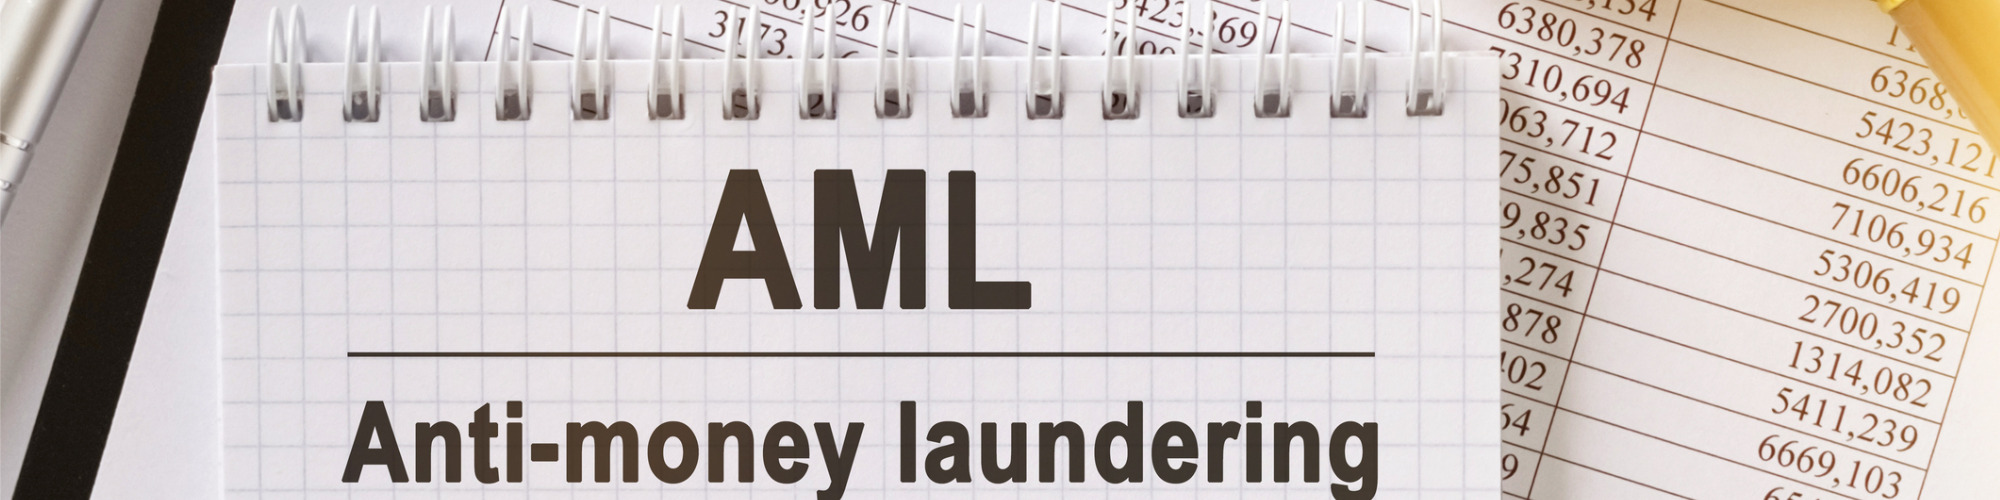 Anti-Money Laundering Compliance - Live Guidance for the Regulated Sector